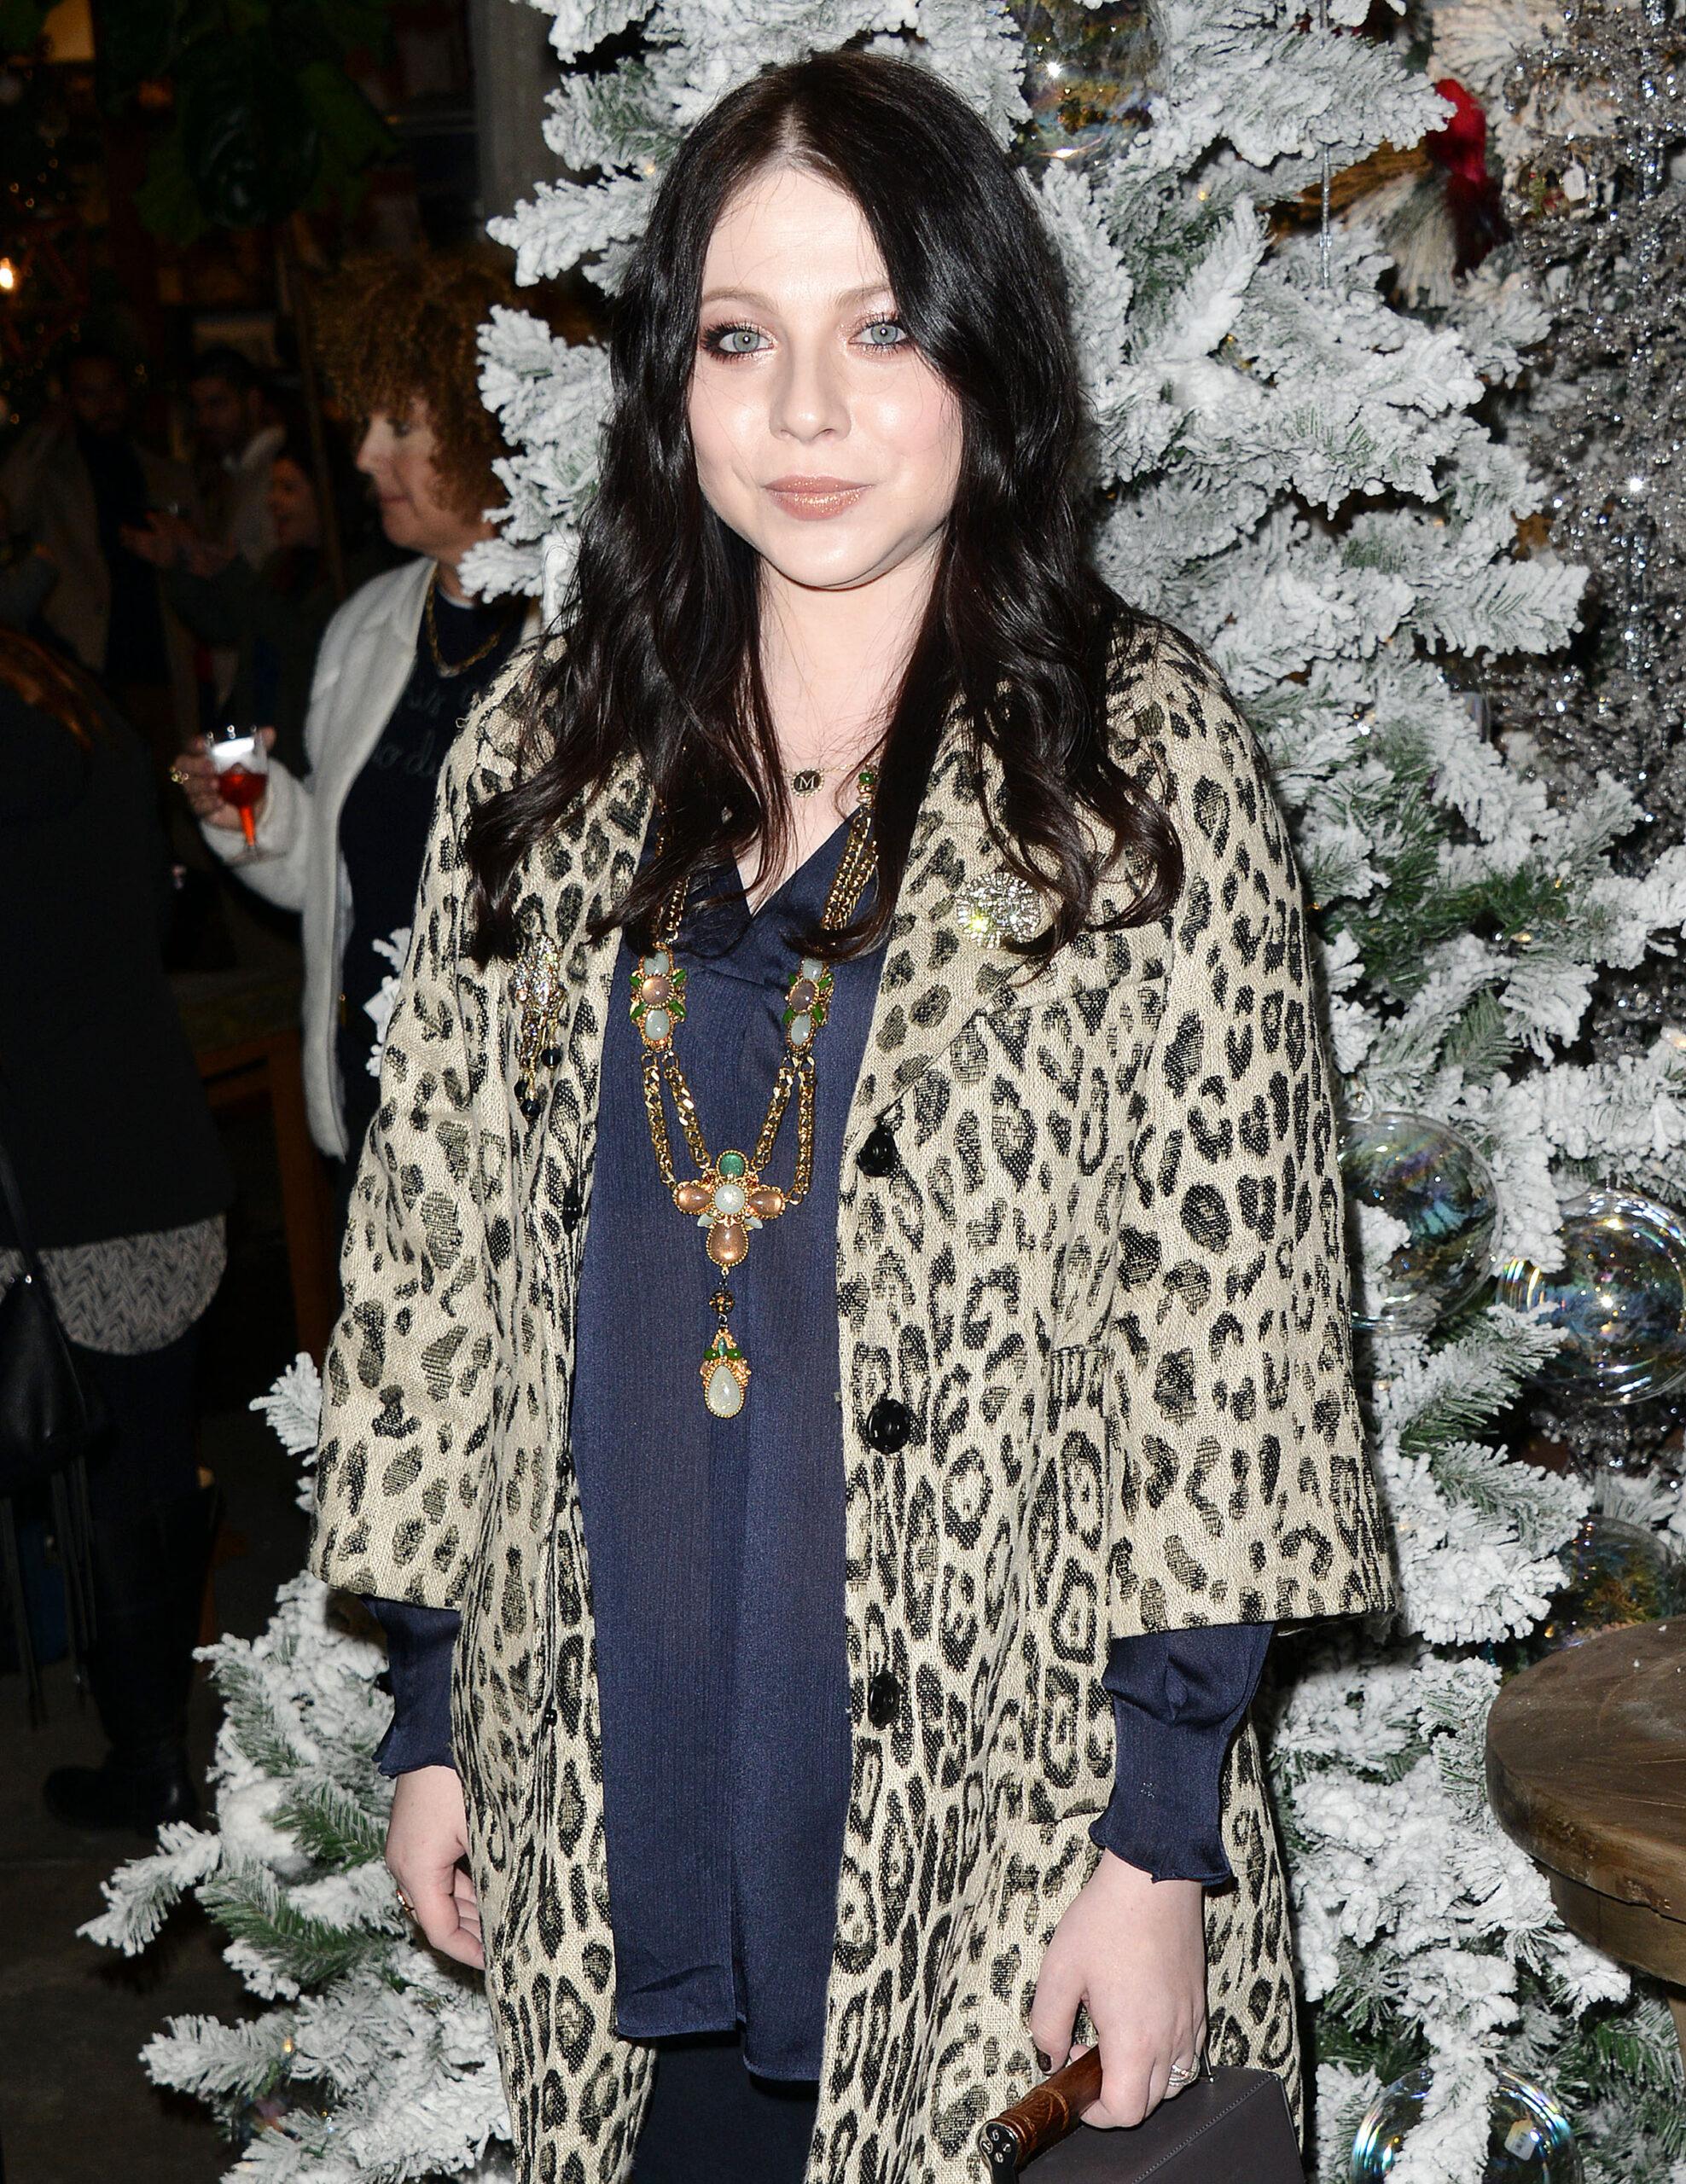 Michelle Trachtenberg attends the 1st Annual Cocktails for a Cause with Love Leo Rescue